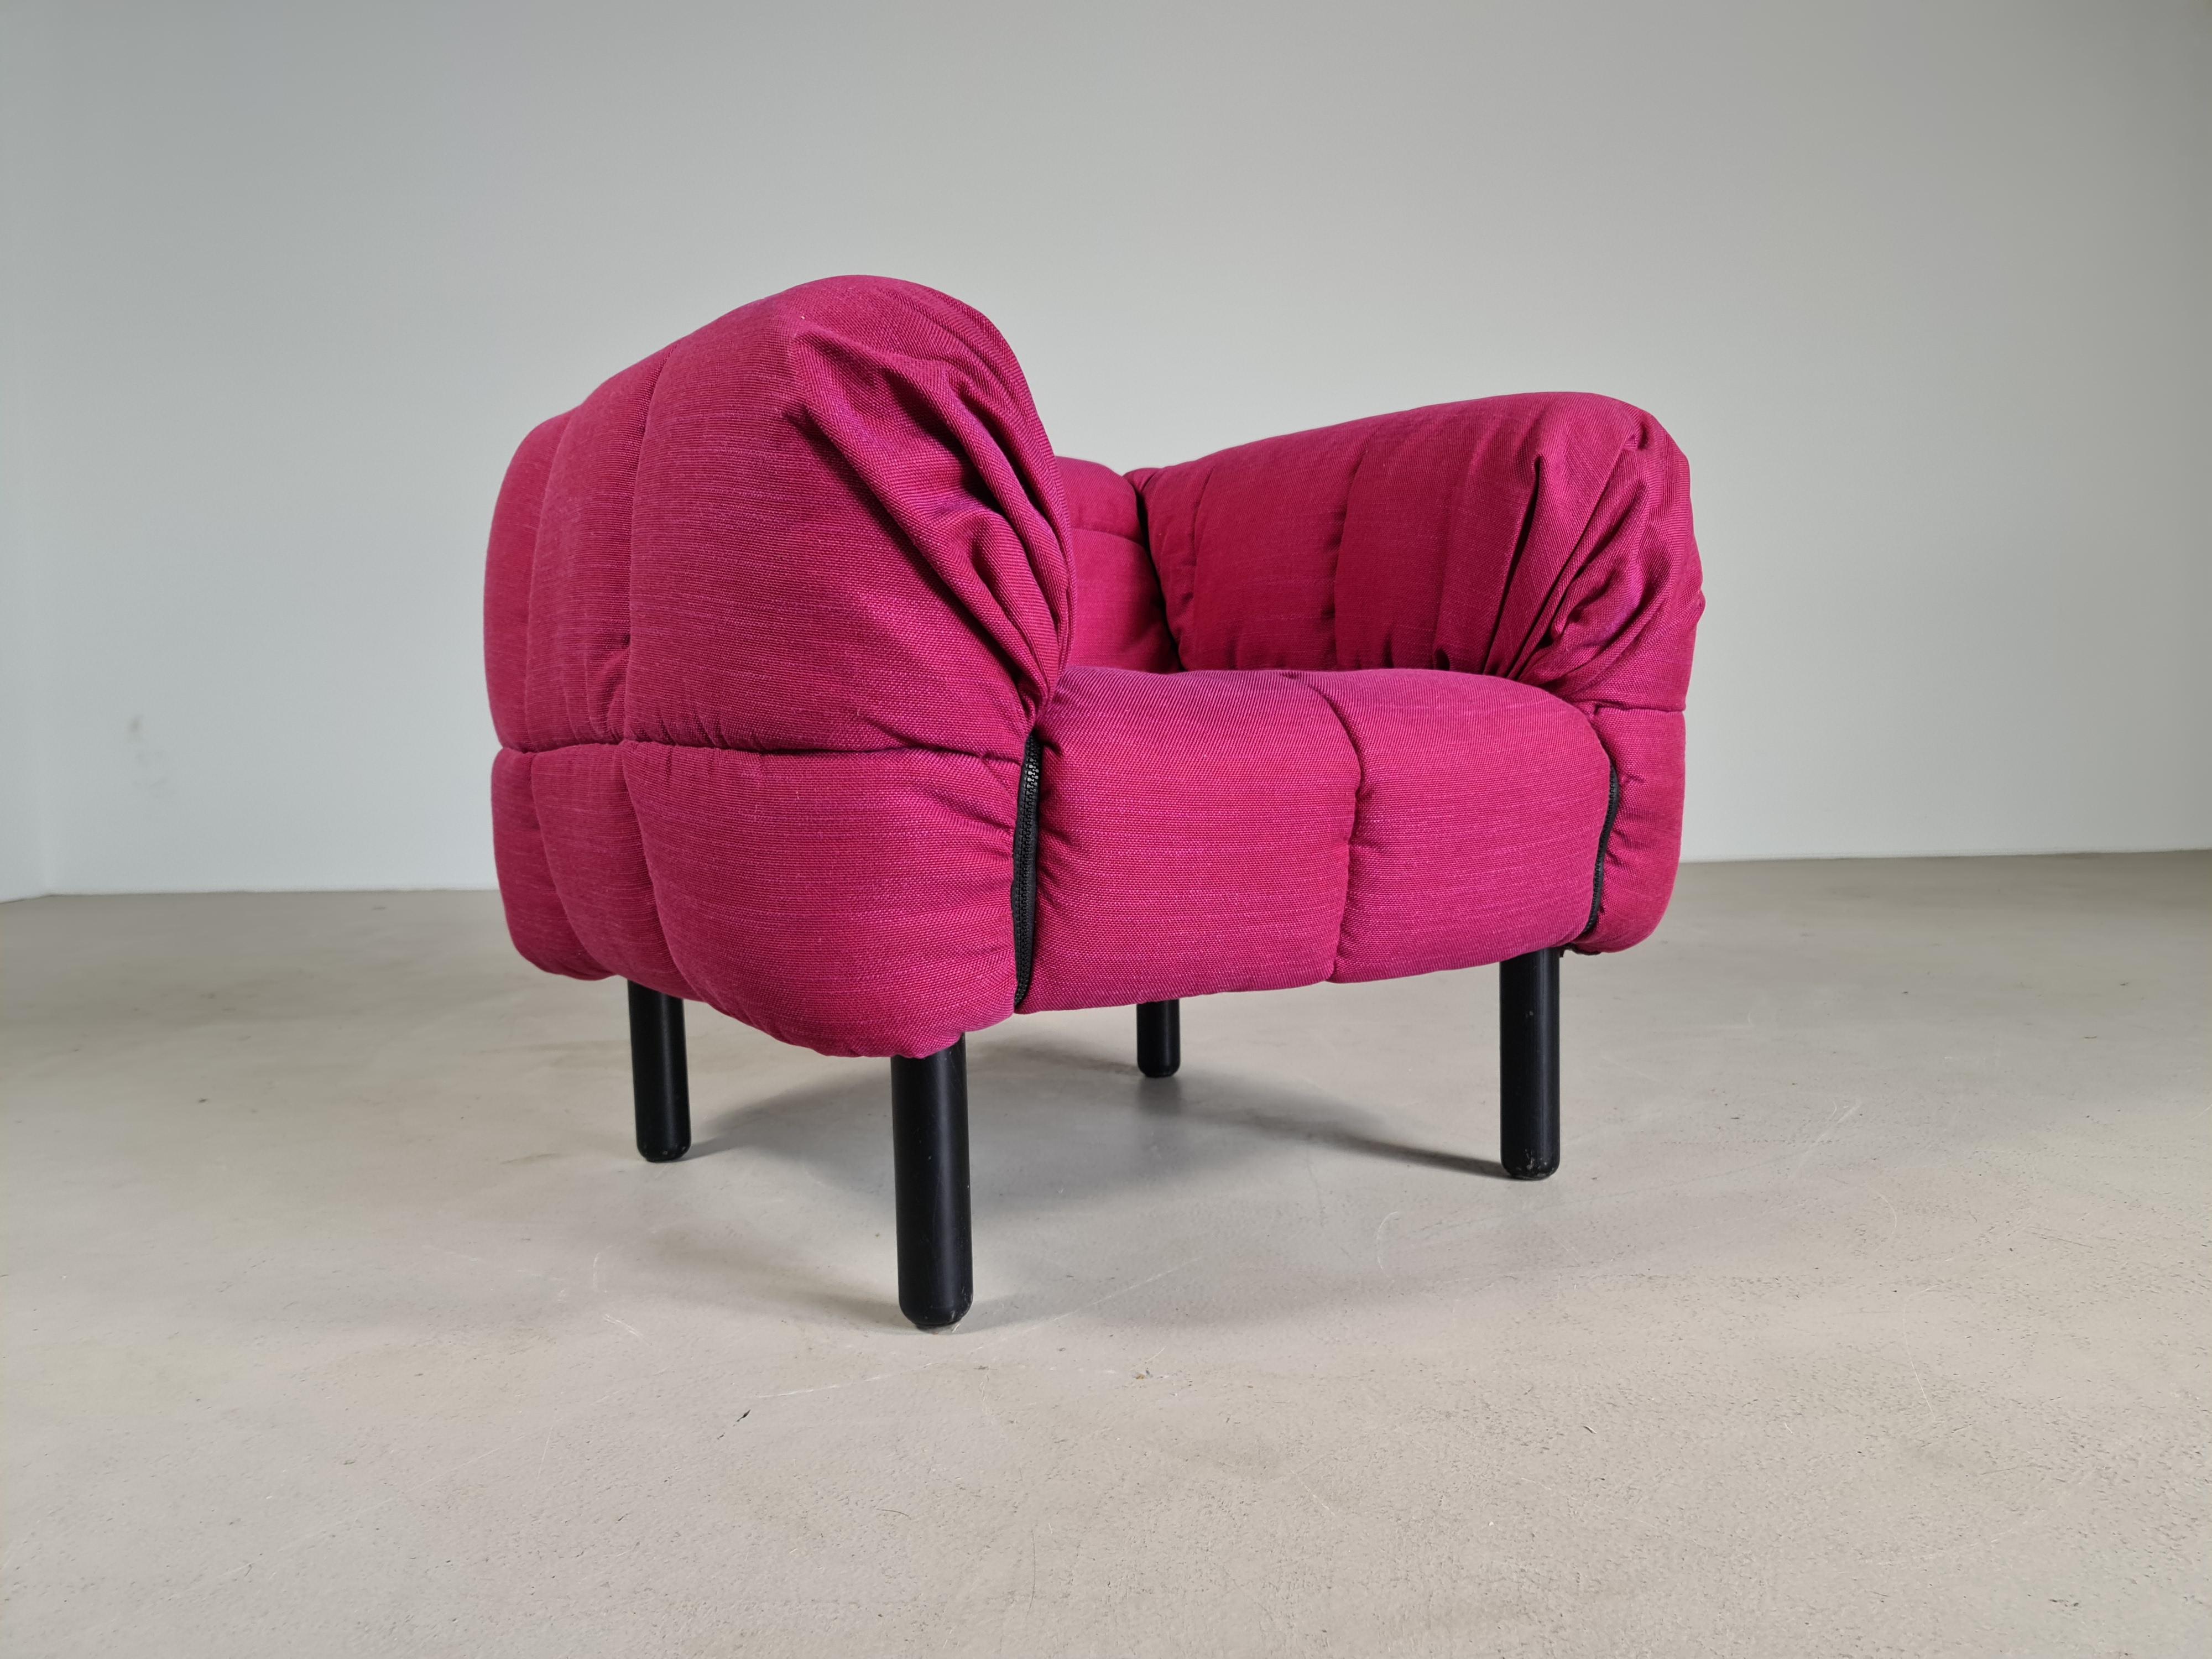 Stunning strips chair by Cini Boeri new upholstered in a dark Fuchsia colour recycled fabric. One of the most famous products of Arflex. Designed in 1968, it was awarded the prize Compasso d’Oro and it is displayed in several museums in the world,